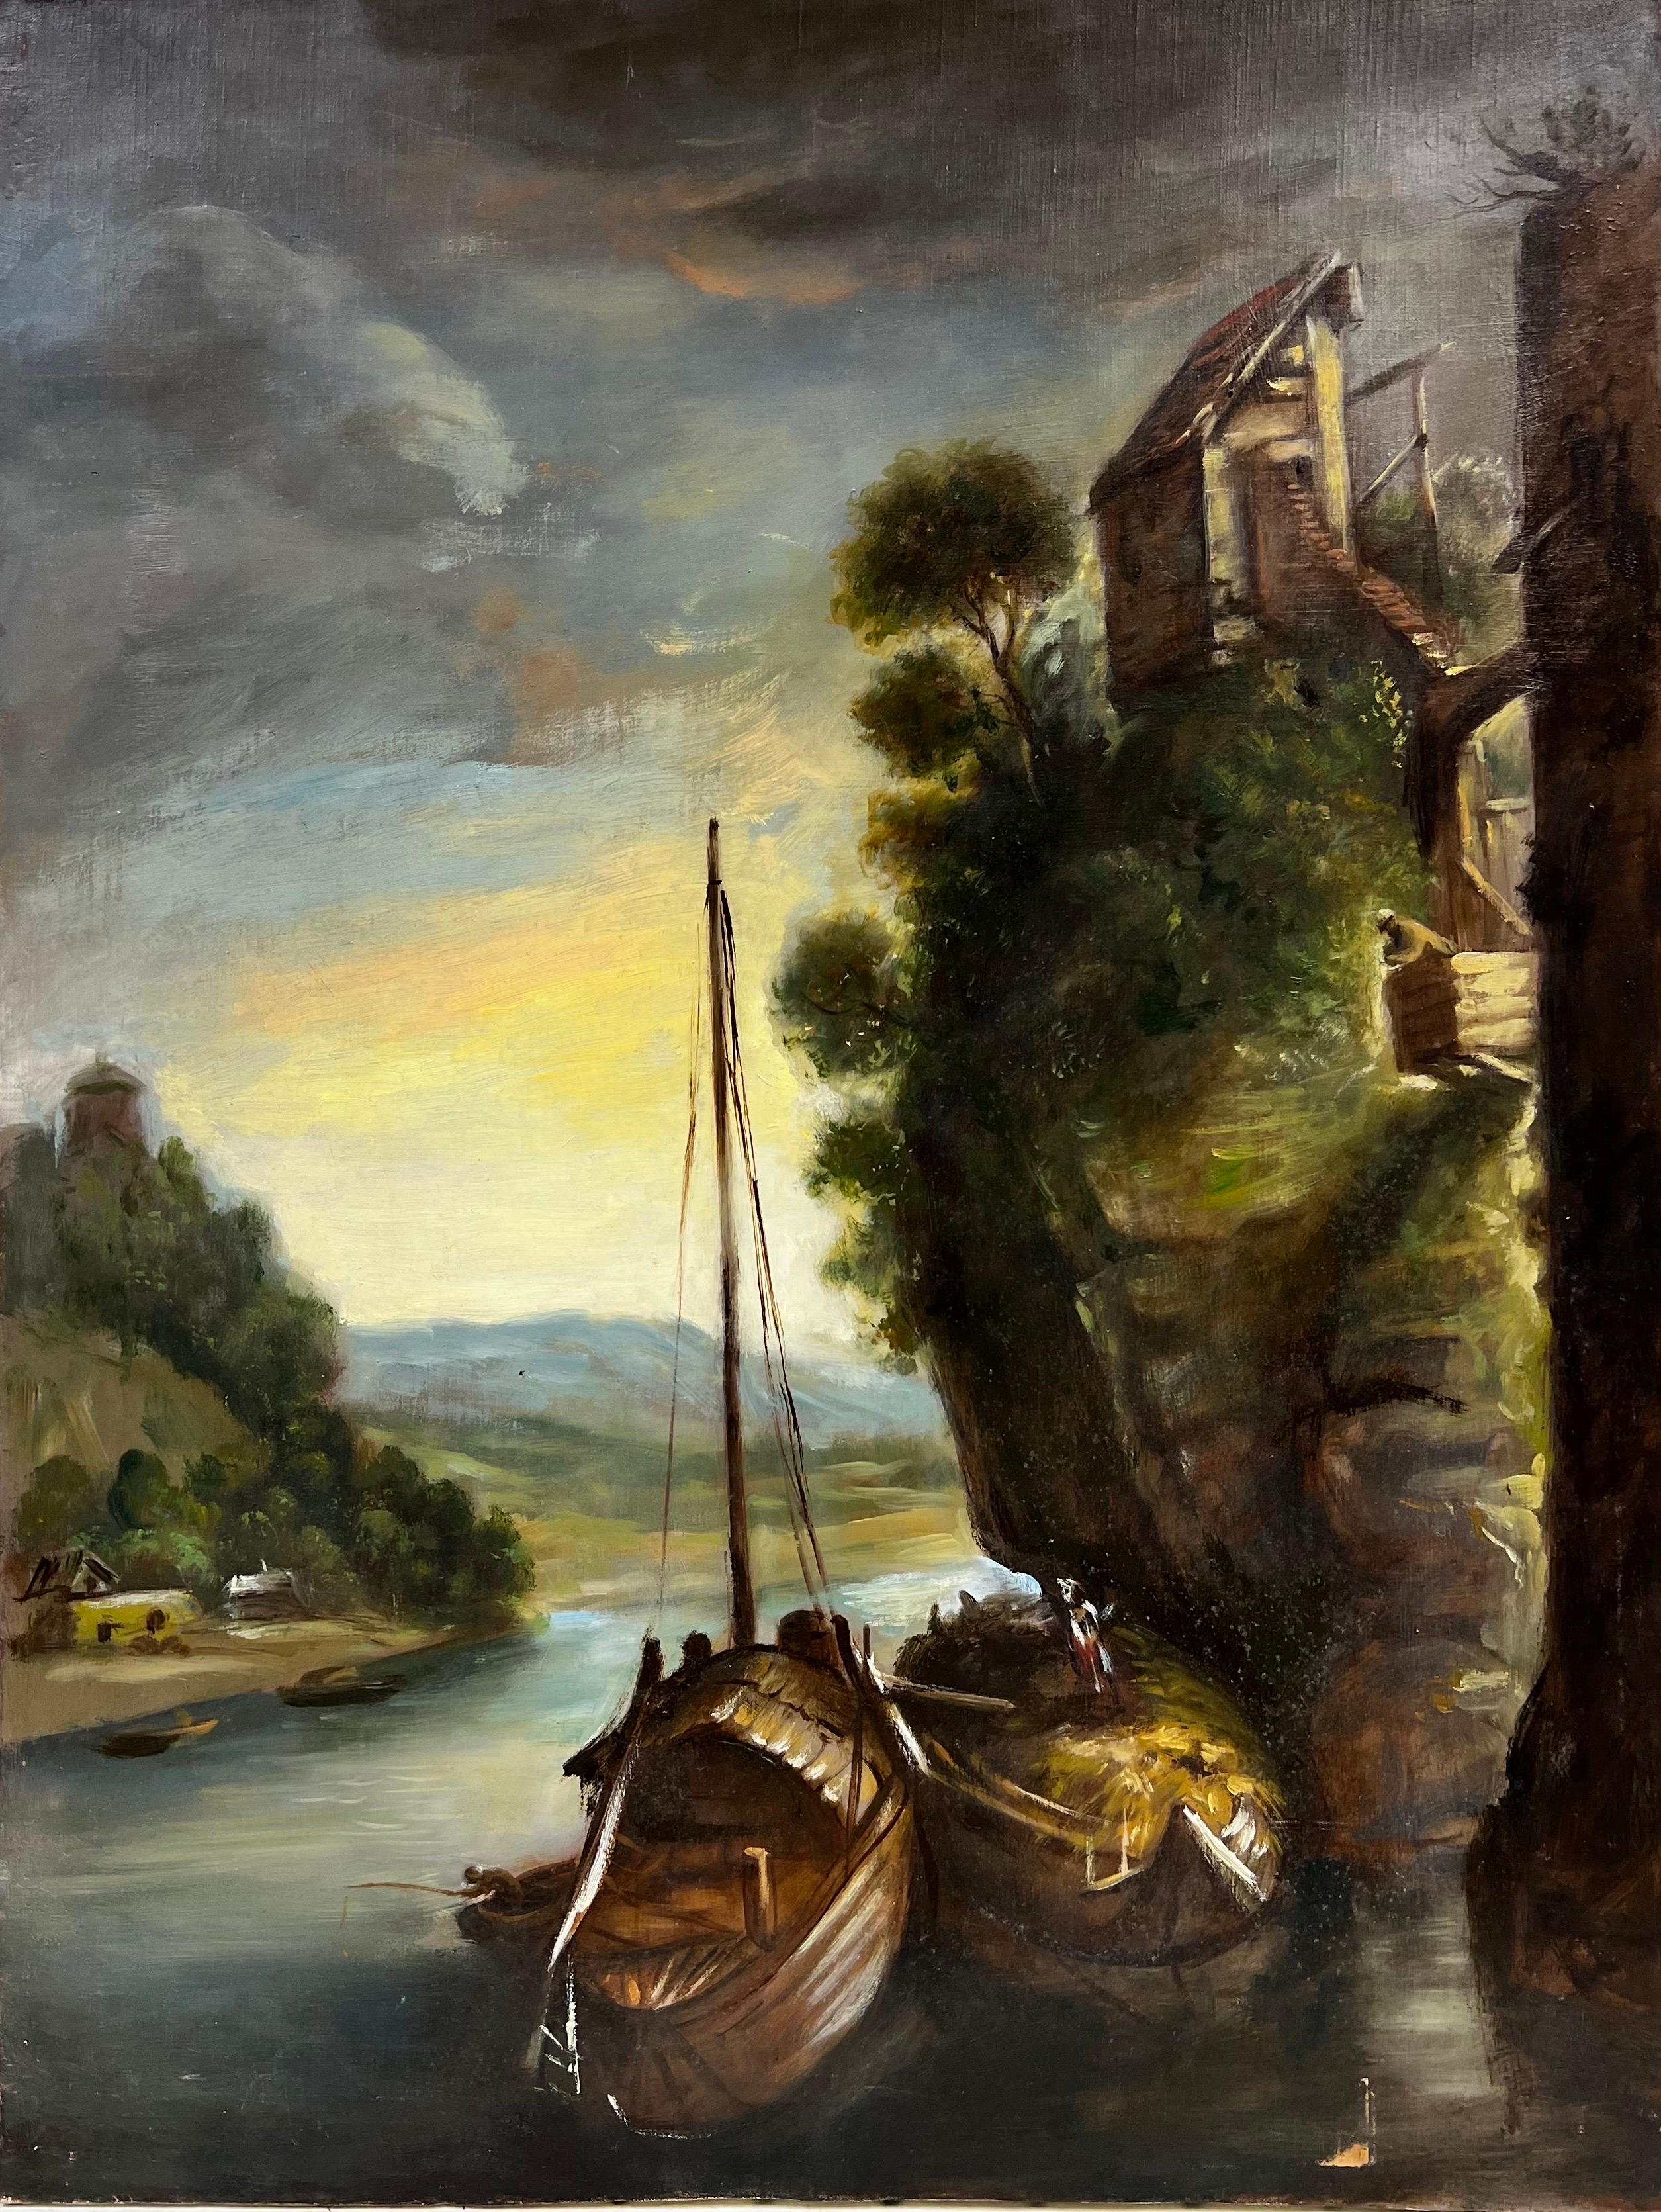 20th Century French School Landscape Painting - French Oil Painting Tranquil River Scene with Ferry Boats next to Old Buildings